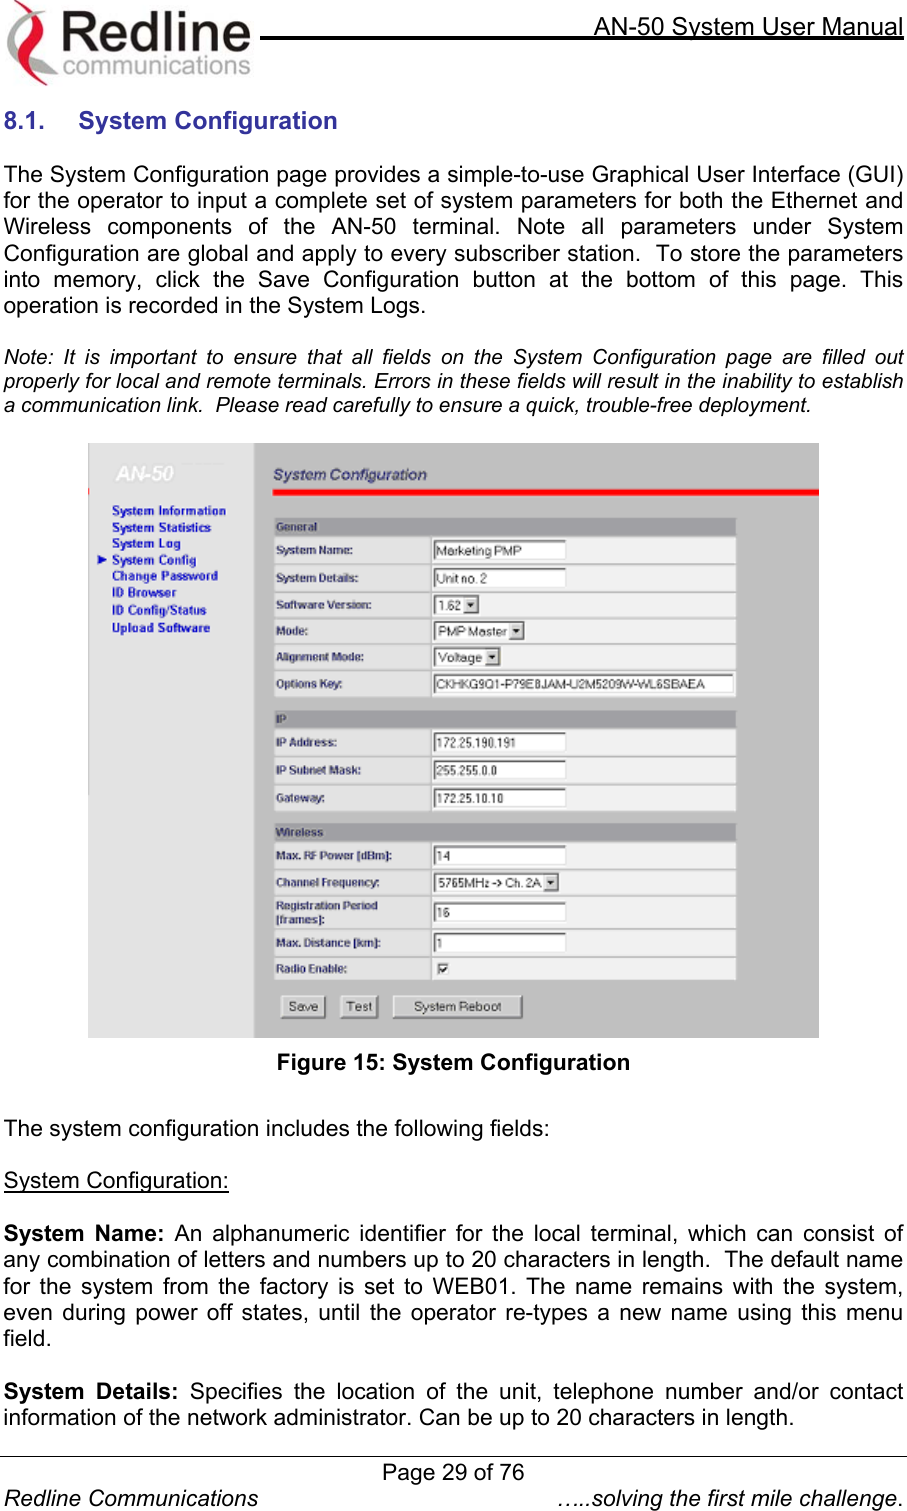     AN-50 System User Manual  Redline Communications  …..solving the first mile challenge. 8.1. System Configuration  The System Configuration page provides a simple-to-use Graphical User Interface (GUI) for the operator to input a complete set of system parameters for both the Ethernet and Wireless components of the AN-50 terminal. Note all parameters under System Configuration are global and apply to every subscriber station.  To store the parameters into memory, click the Save Configuration button at the bottom of this page. This operation is recorded in the System Logs.    Note: It is important to ensure that all fields on the System Configuration page are filled out properly for local and remote terminals. Errors in these fields will result in the inability to establish a communication link.  Please read carefully to ensure a quick, trouble-free deployment.    Figure 15: System Configuration  The system configuration includes the following fields:  System Configuration:  System Name: An alphanumeric identifier for the local terminal, which can consist of any combination of letters and numbers up to 20 characters in length.  The default name for the system from the factory is set to WEB01. The name remains with the system, even during power off states, until the operator re-types a new name using this menu field.  System Details: Specifies the location of the unit, telephone number and/or contact information of the network administrator. Can be up to 20 characters in length.  Page 29 of 76